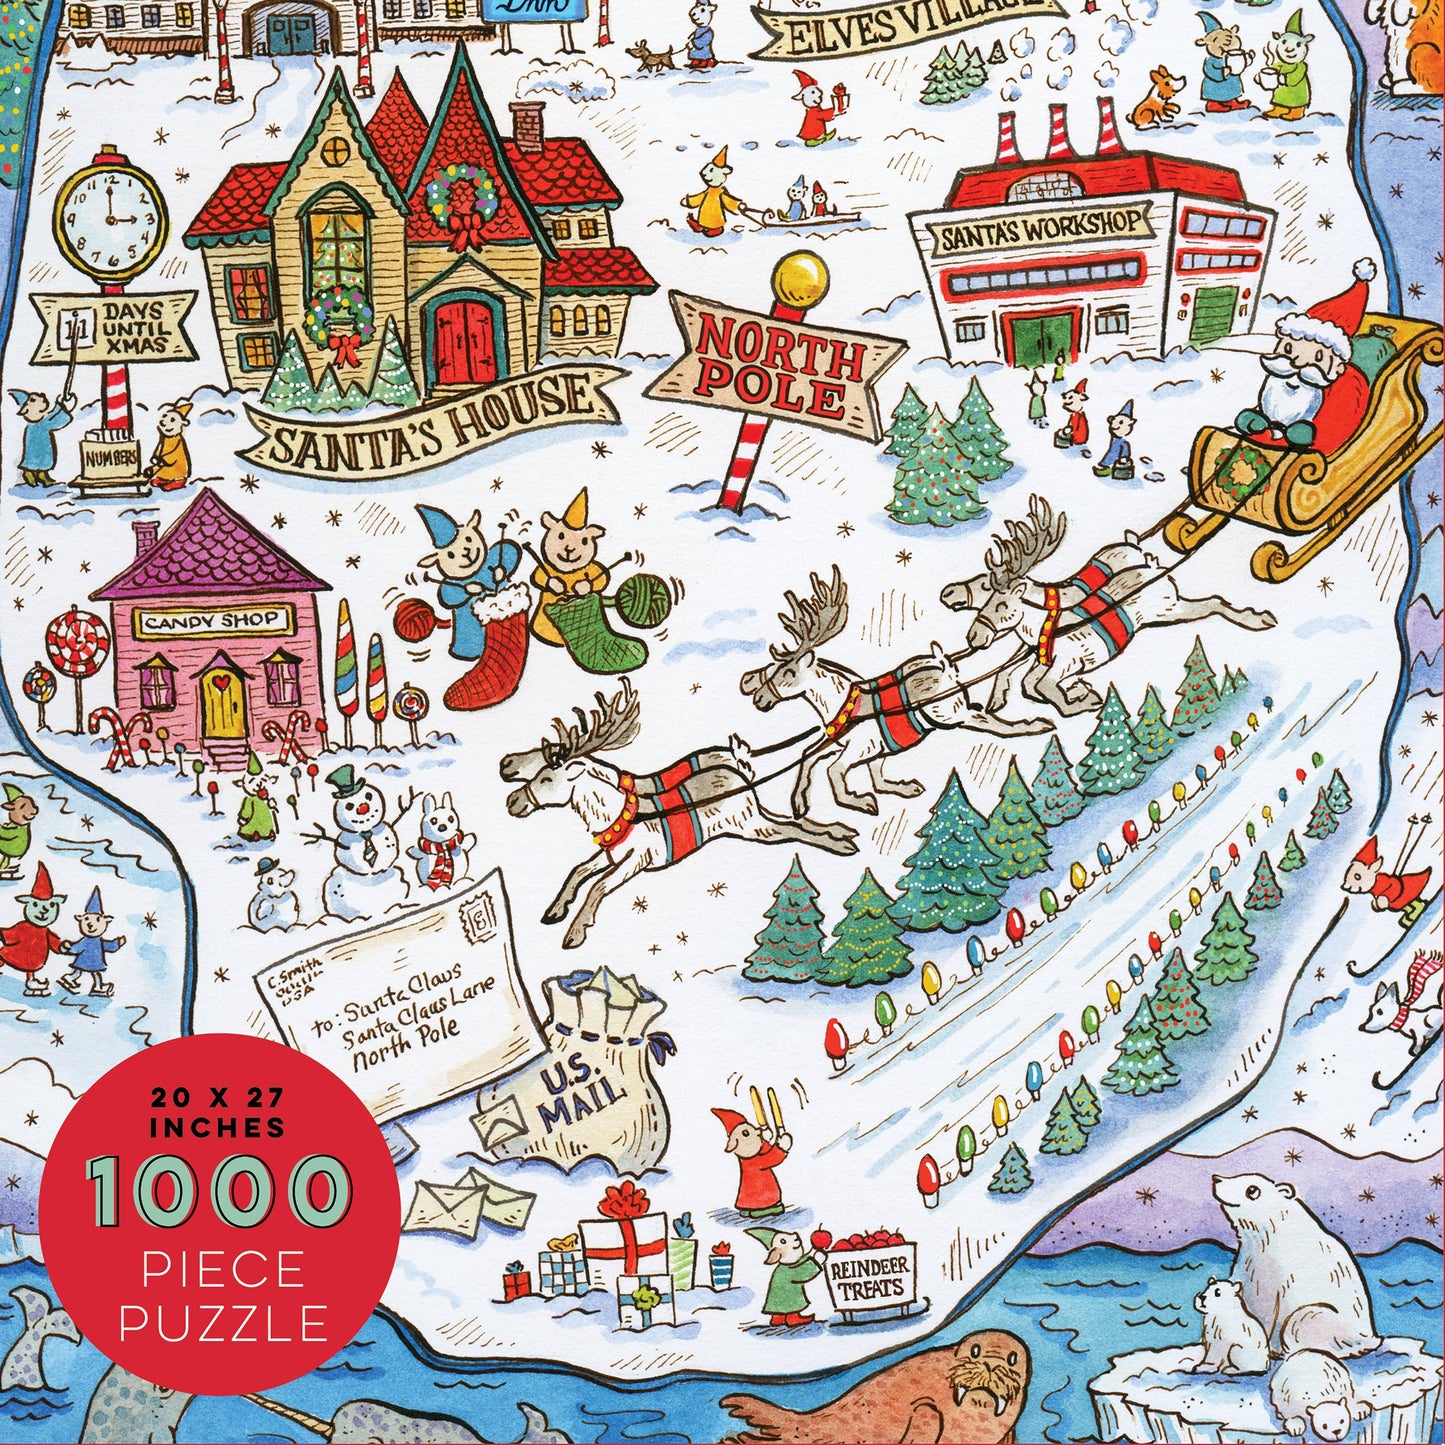 1000 Piece Greetings From The North Pole Christmas Jigsaw